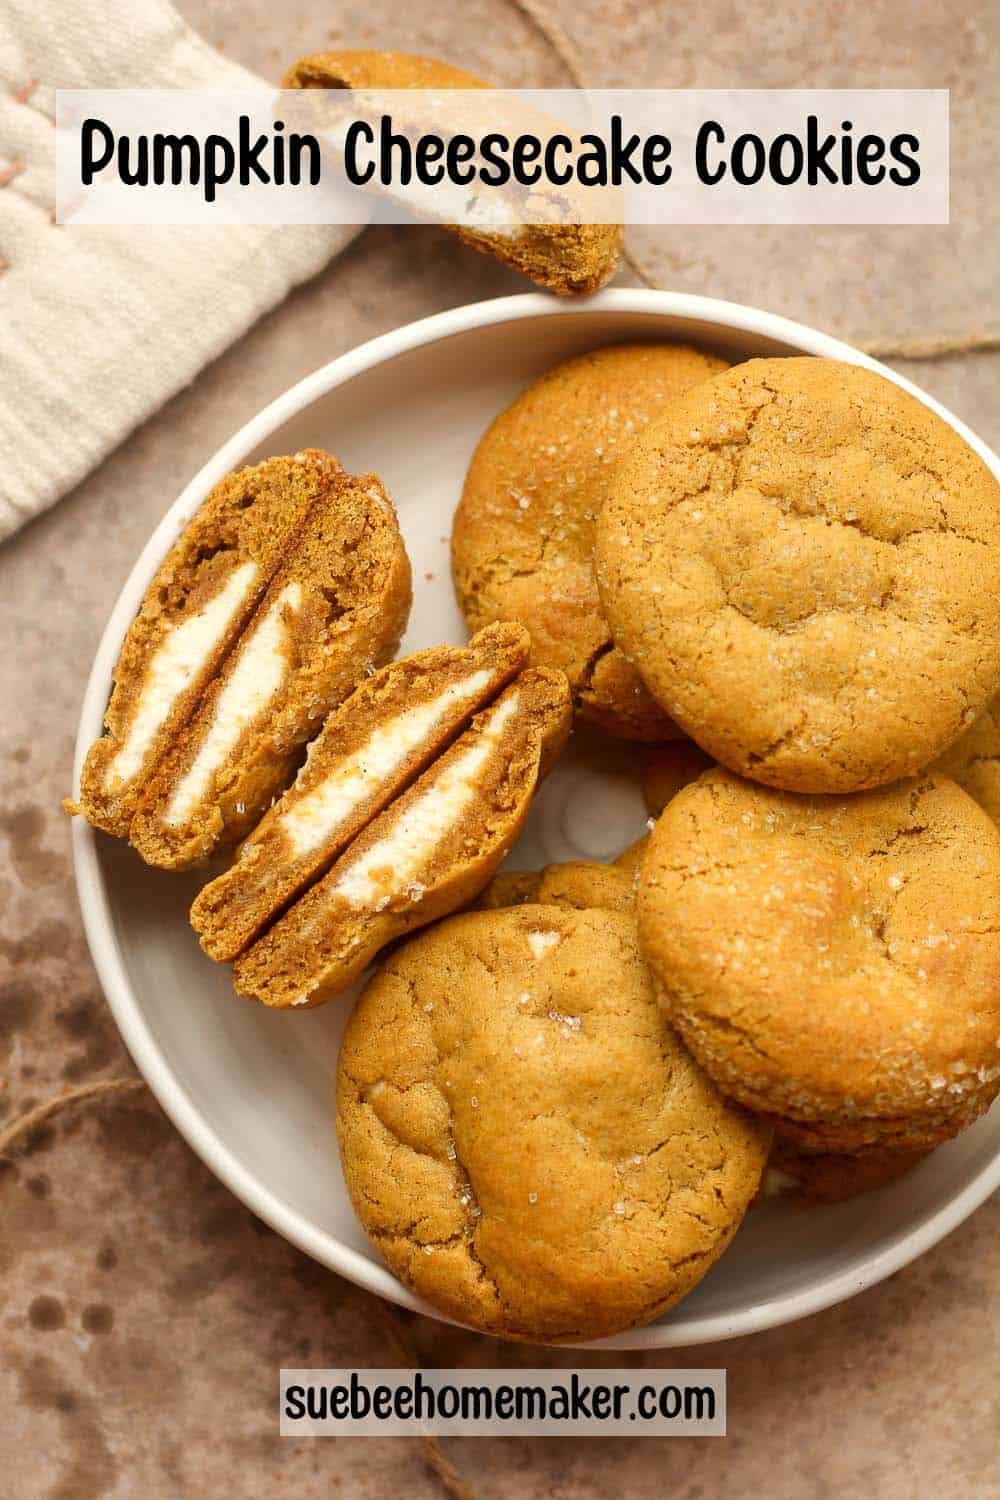 A bowl of pumpkin cheesecake cookies showing the insides of two of them.